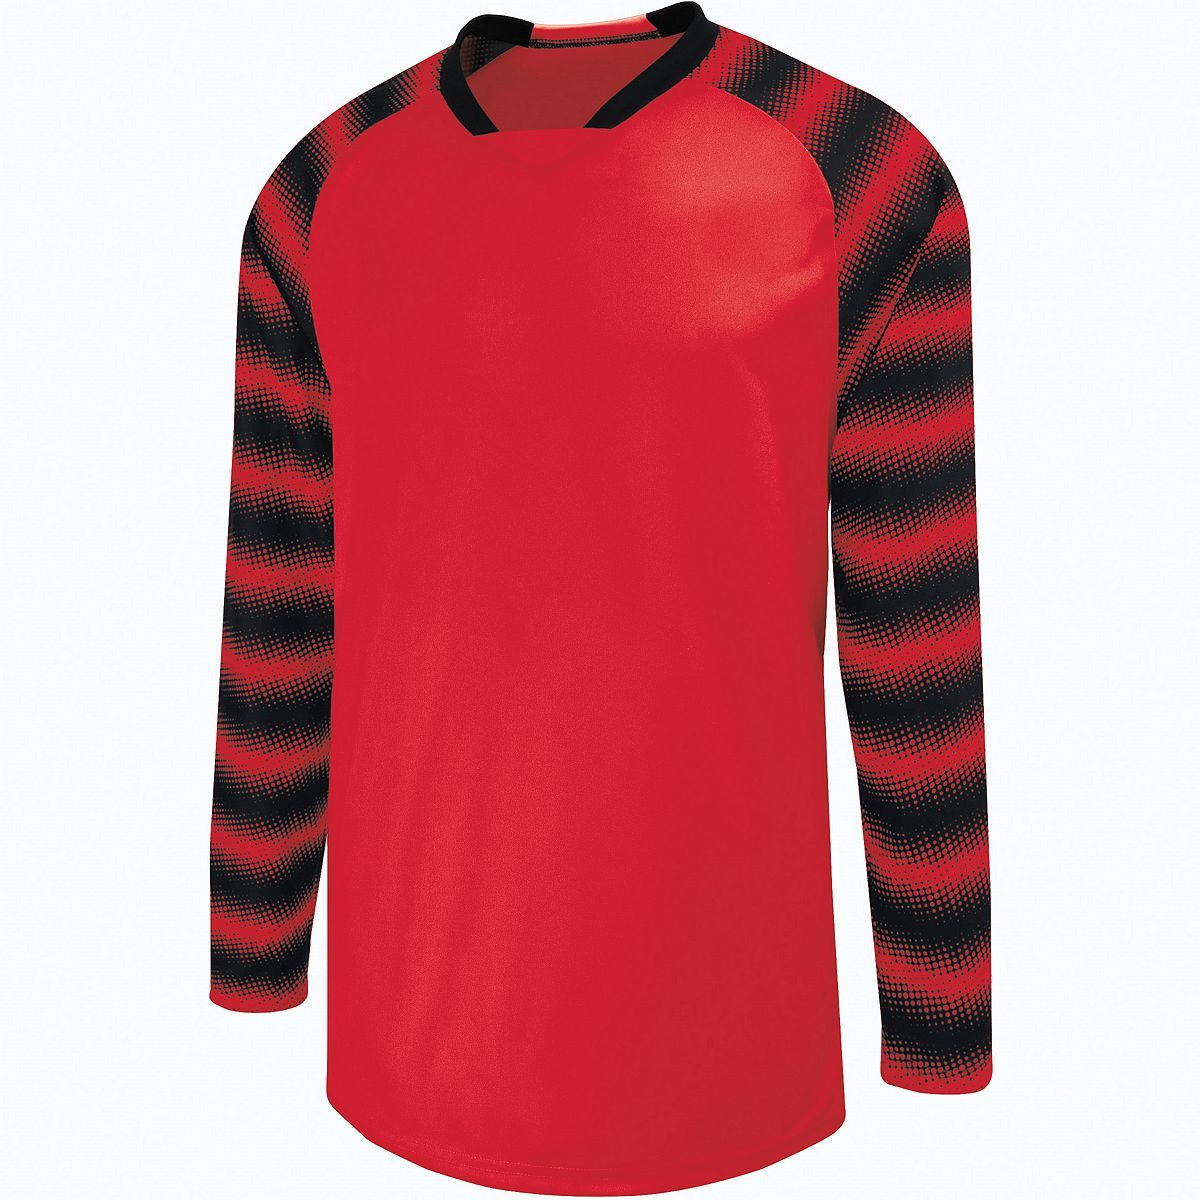 High 5 Youth Prism Goalkeeper Jersey in Scarlet/Black  -Part of the Youth, Youth-Jersey, High5-Products, Soccer, Shirts, All-Sports-1 product lines at KanaleyCreations.com